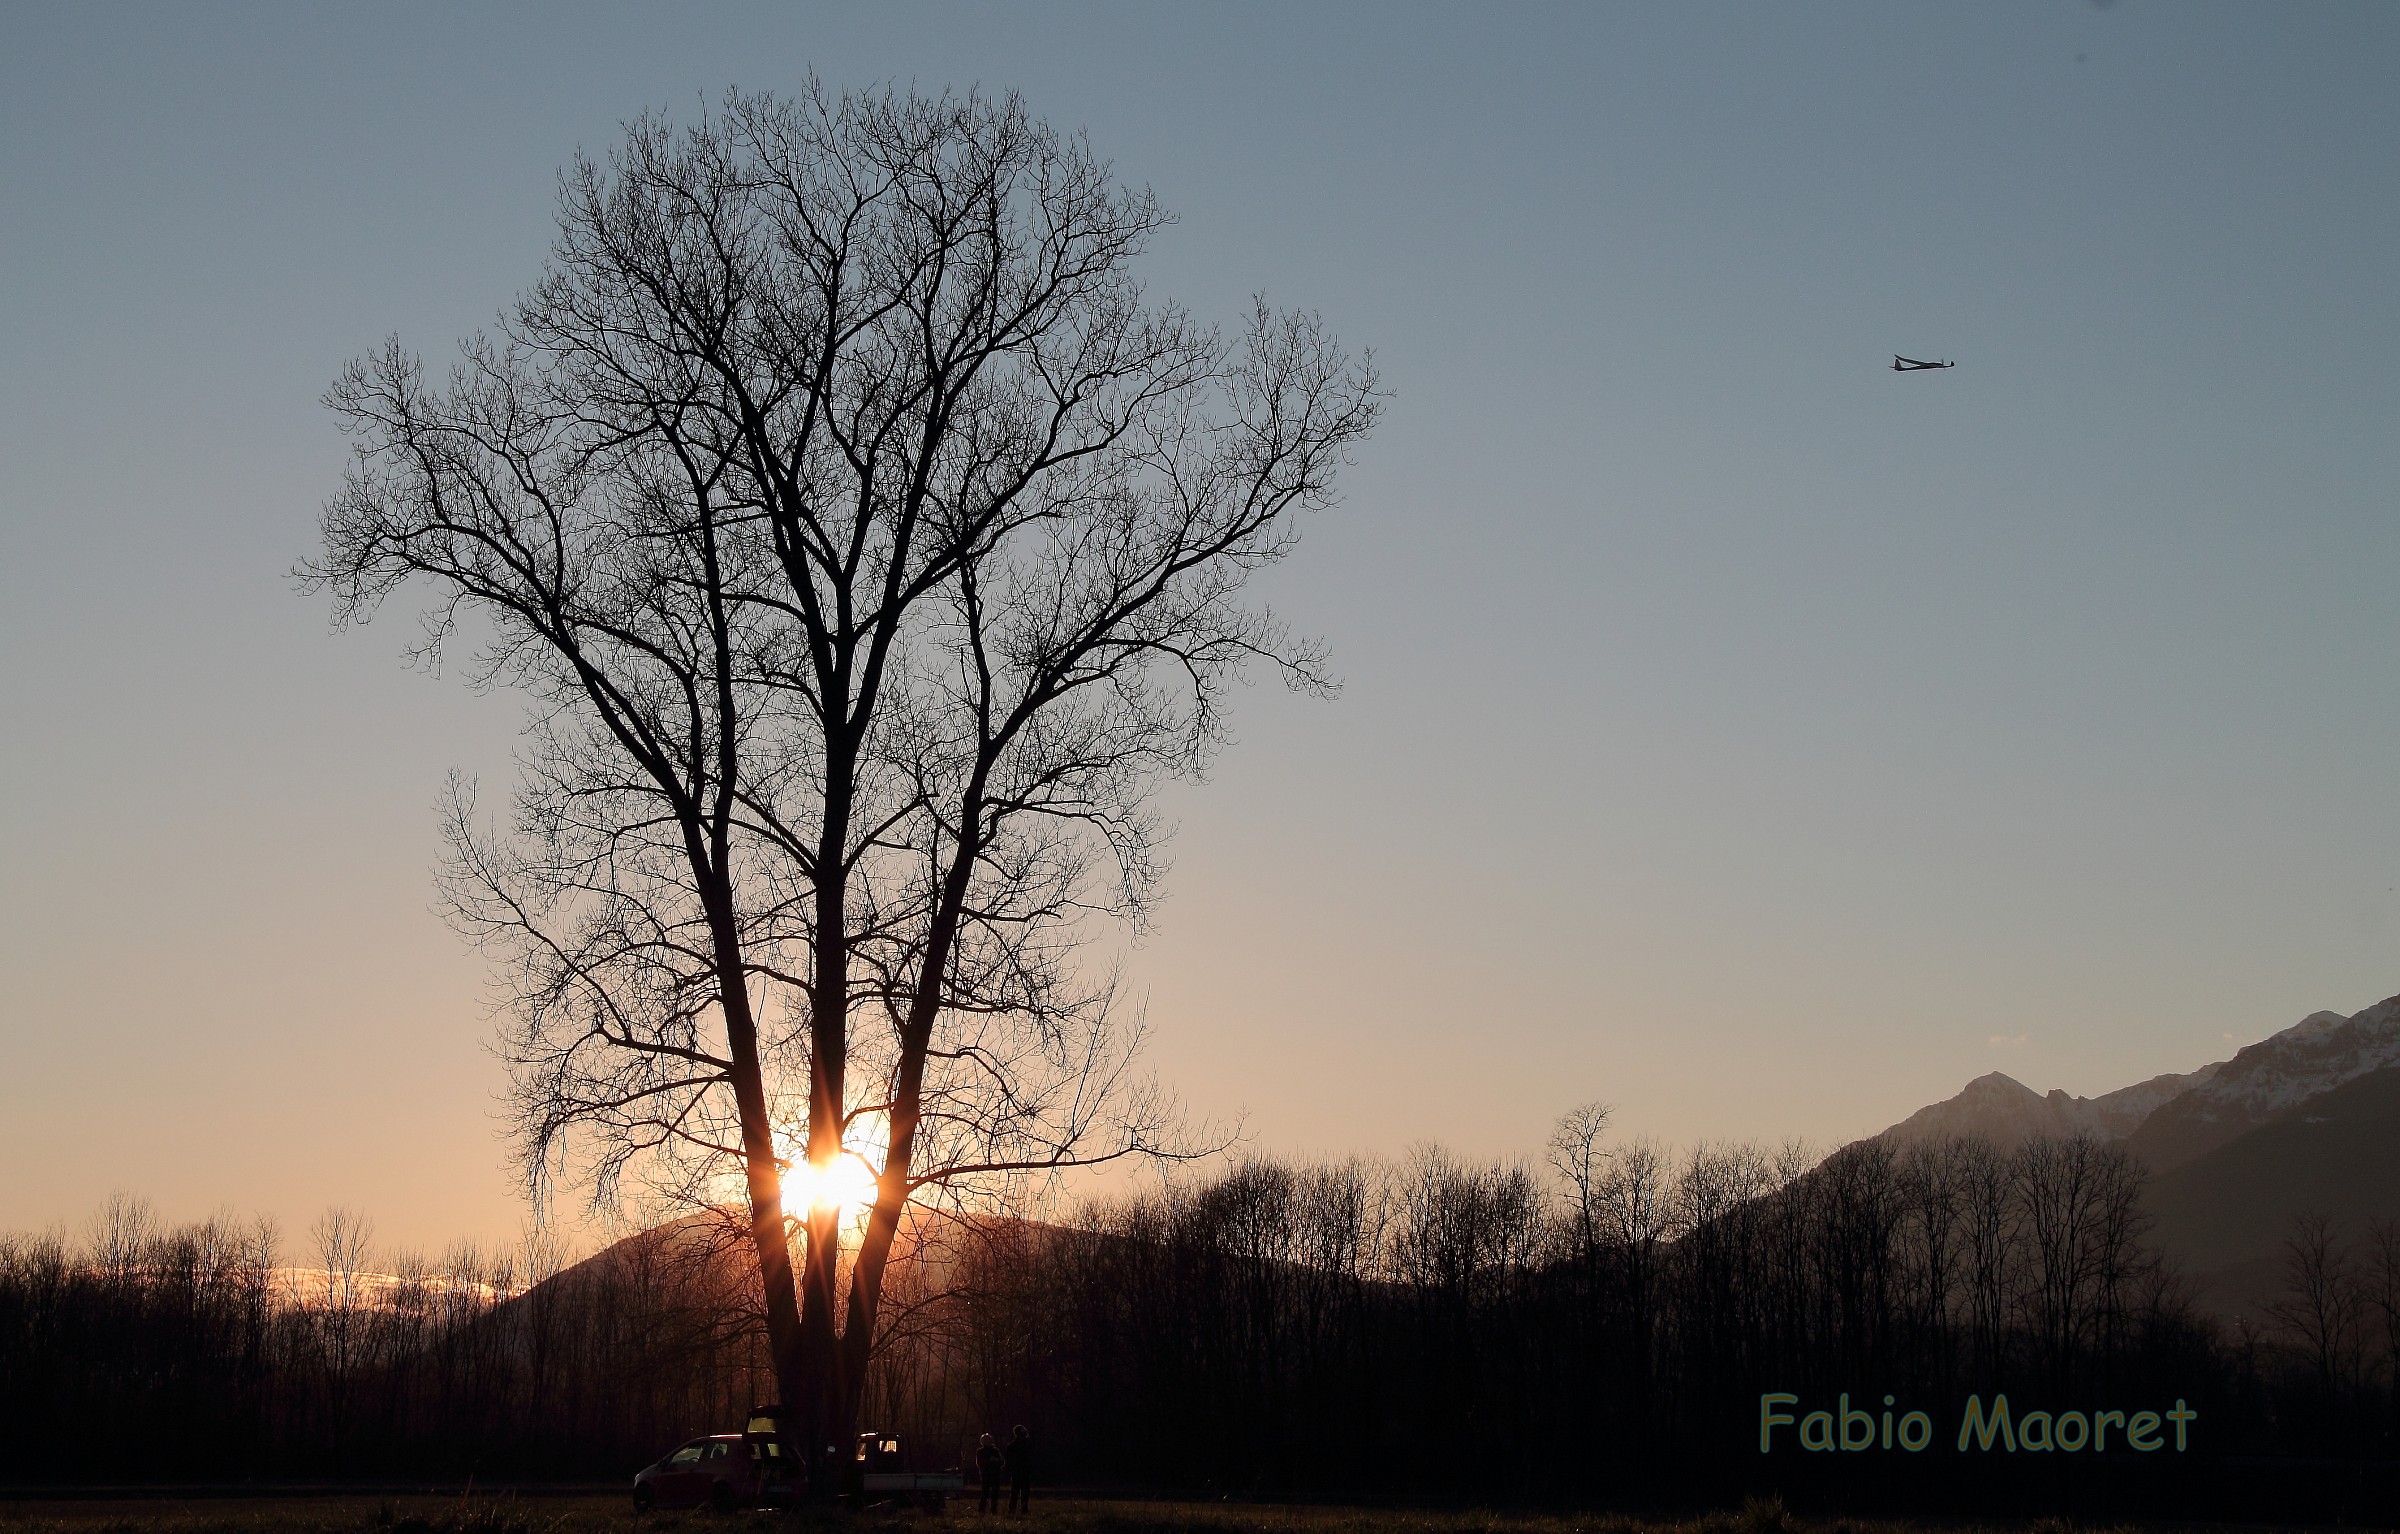 The Tree, Sunset, and The Airplane .......